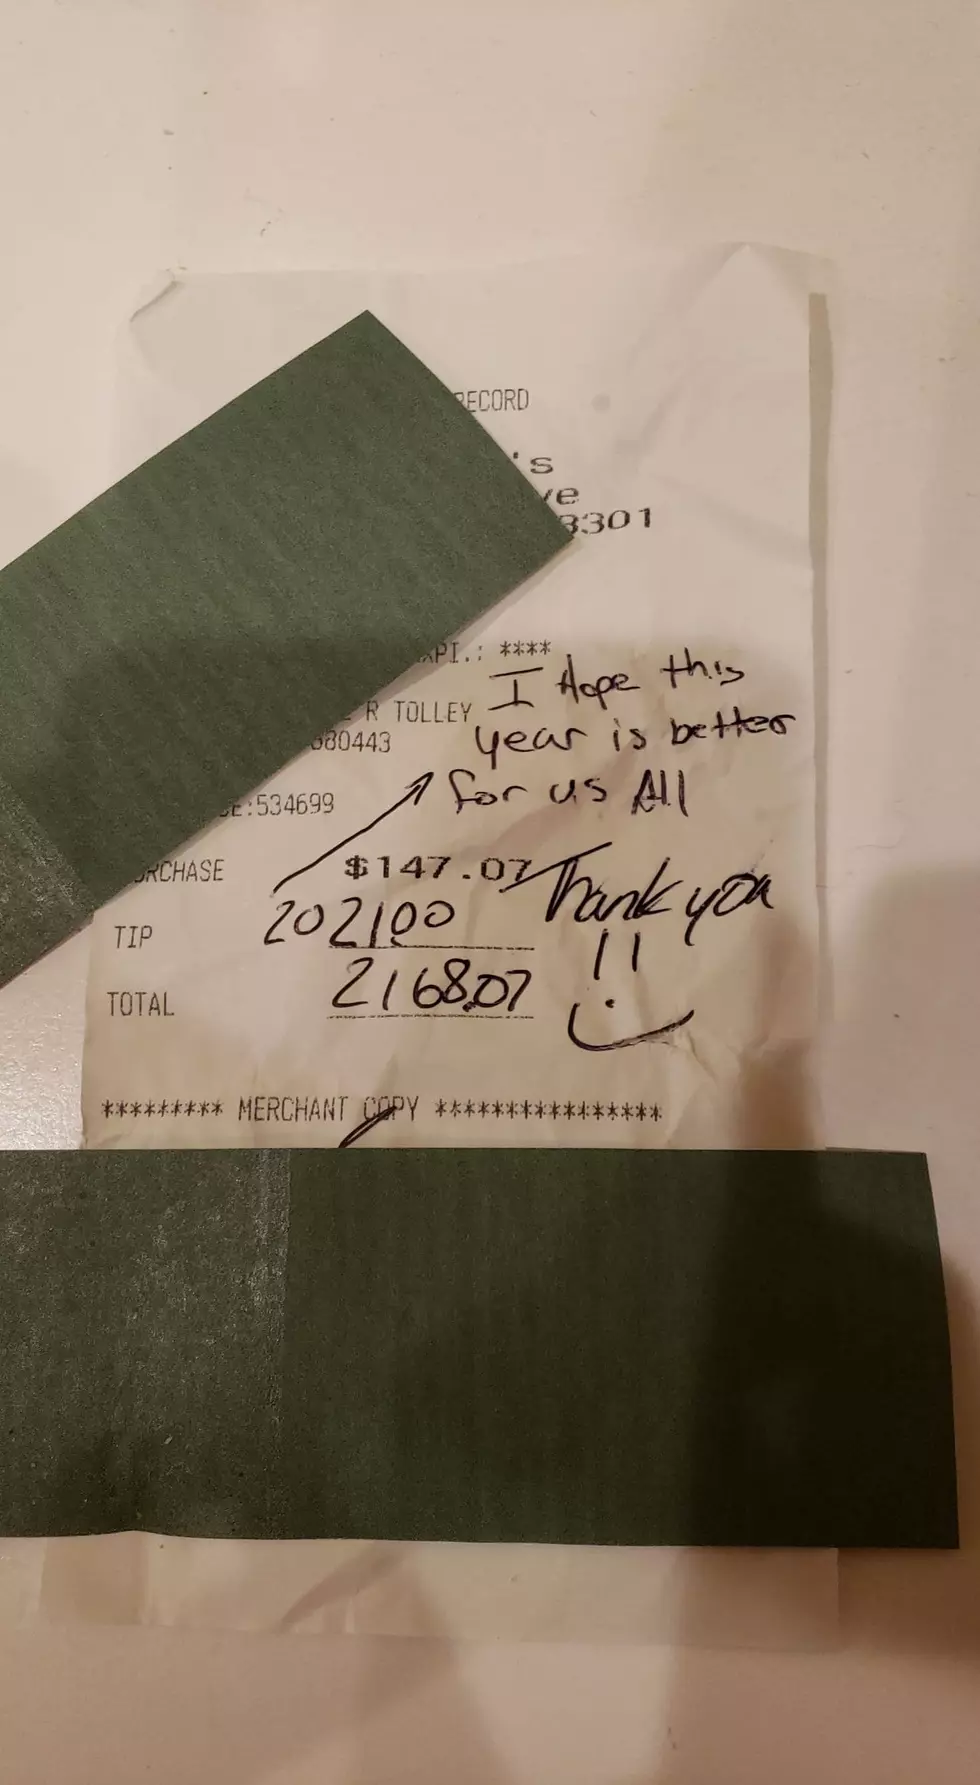 Twin Falls Server Receives $2,021 Tip From Generous Customer